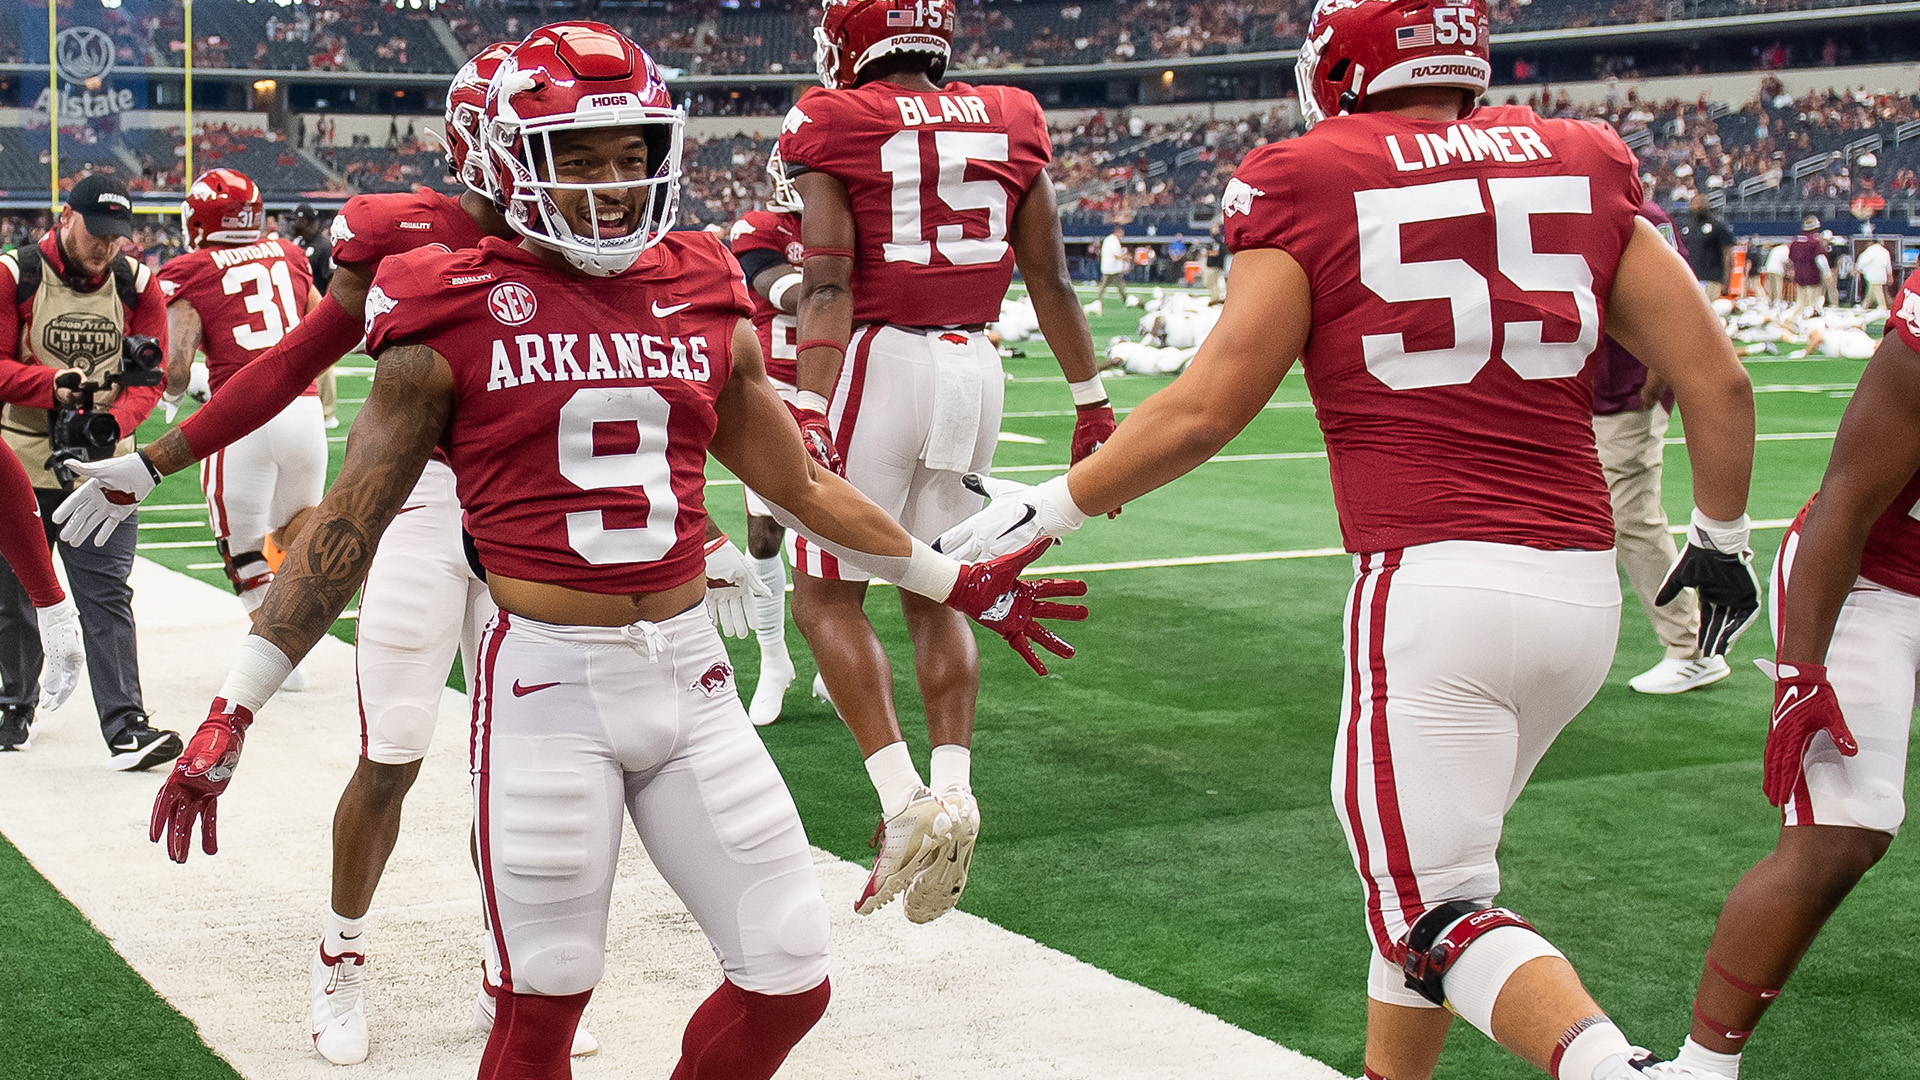 Arkansas college football players high five each other on the sidelines.